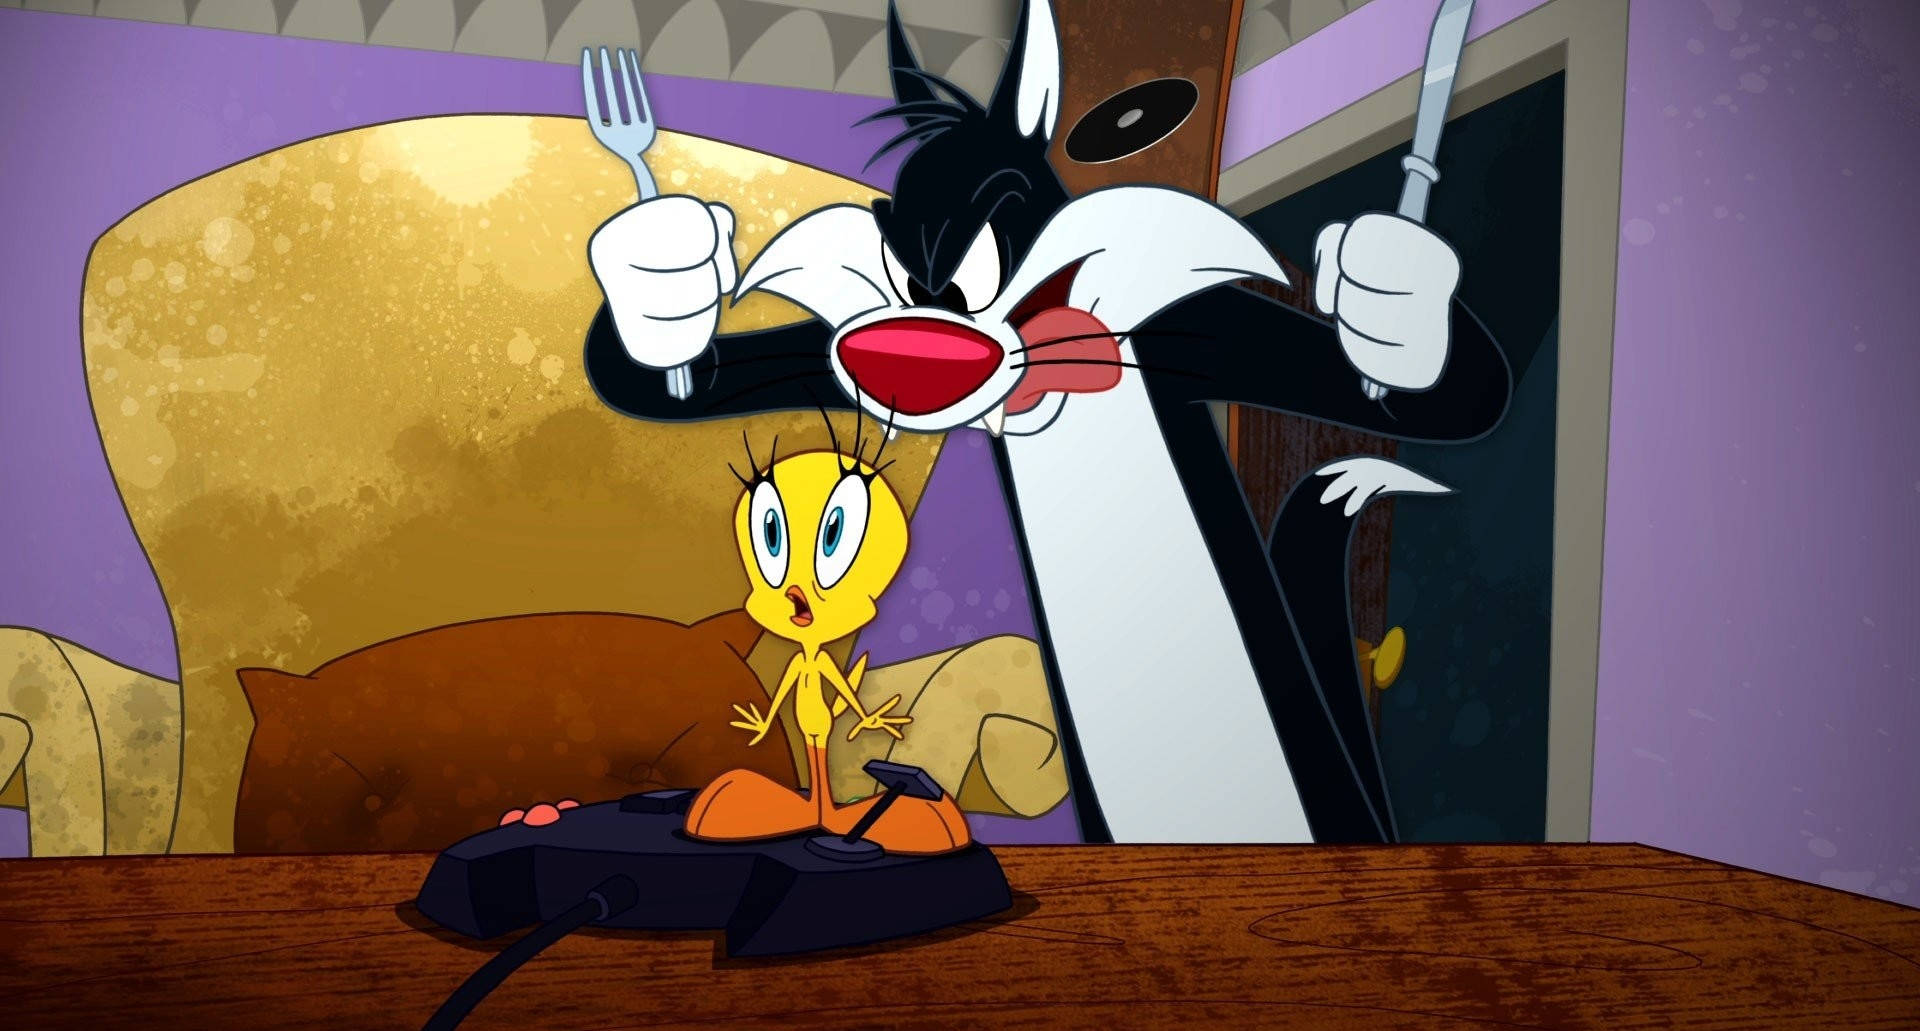 Sylvester Holding Spoon And Fork Background